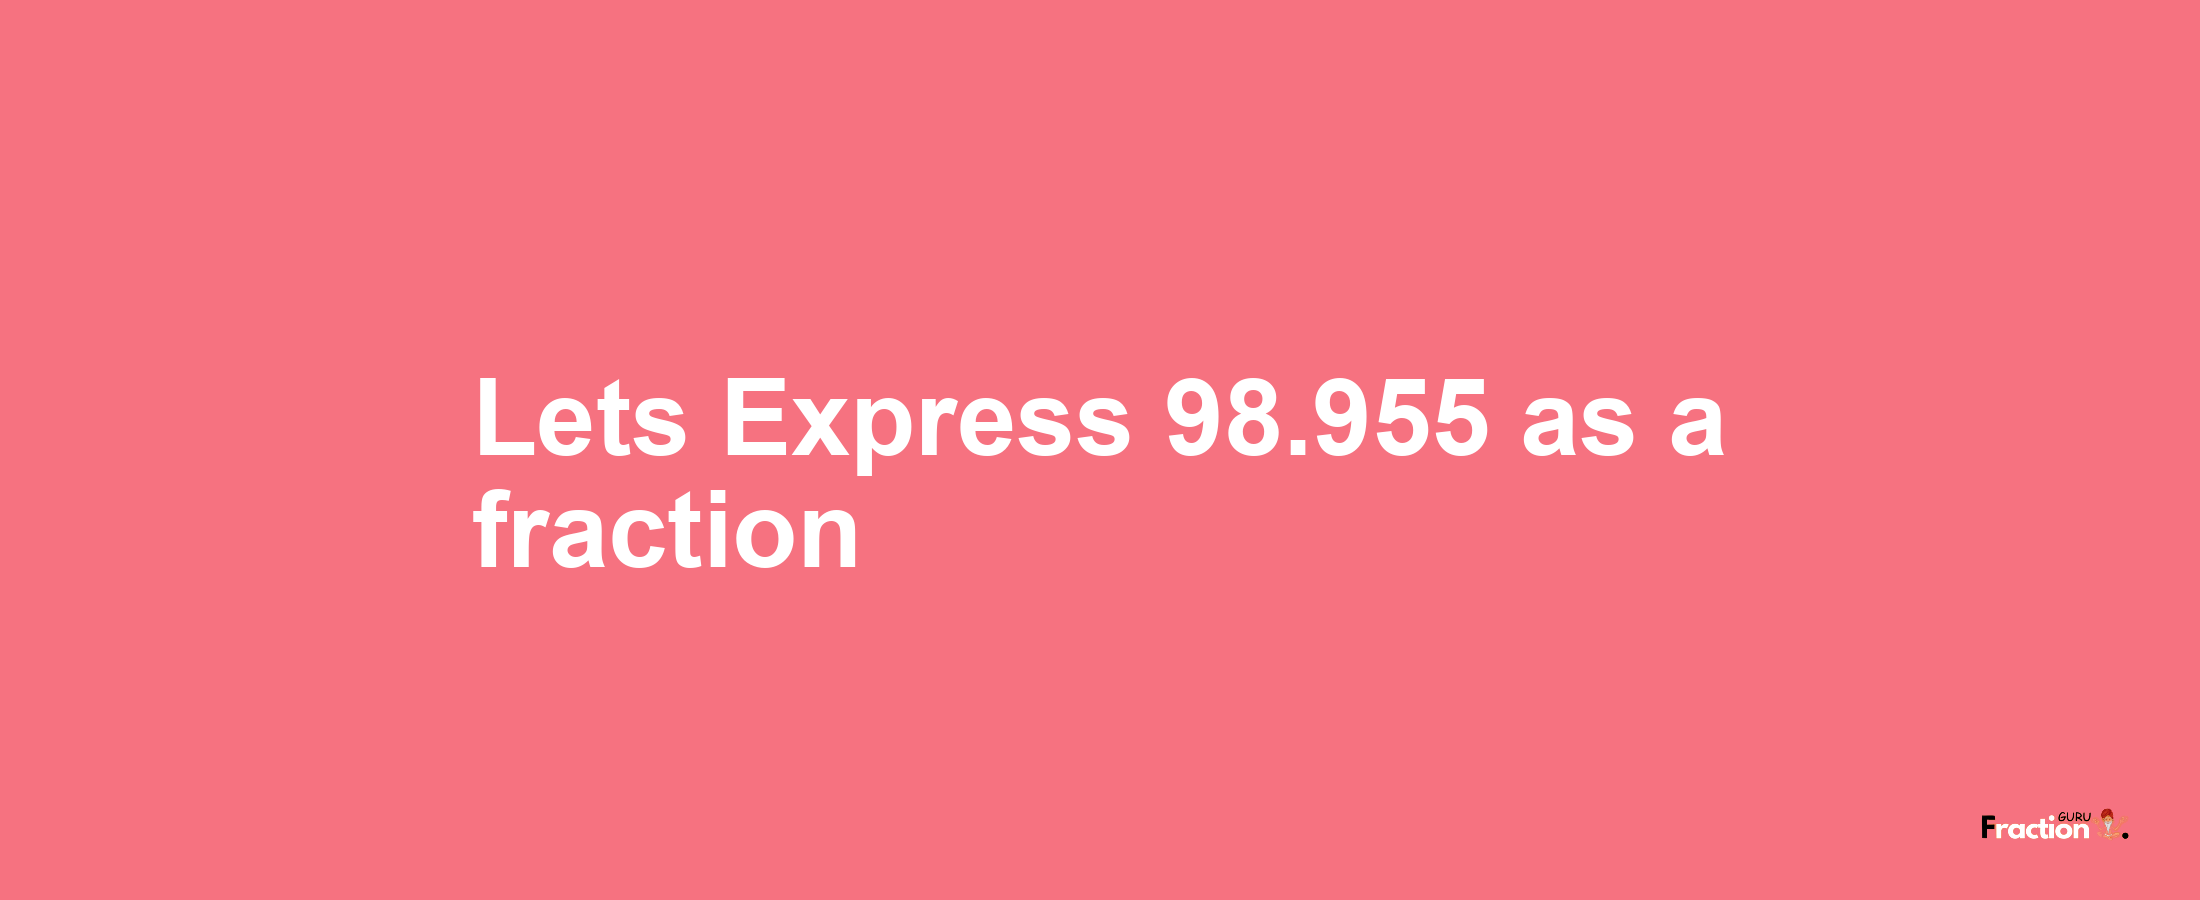 Lets Express 98.955 as afraction